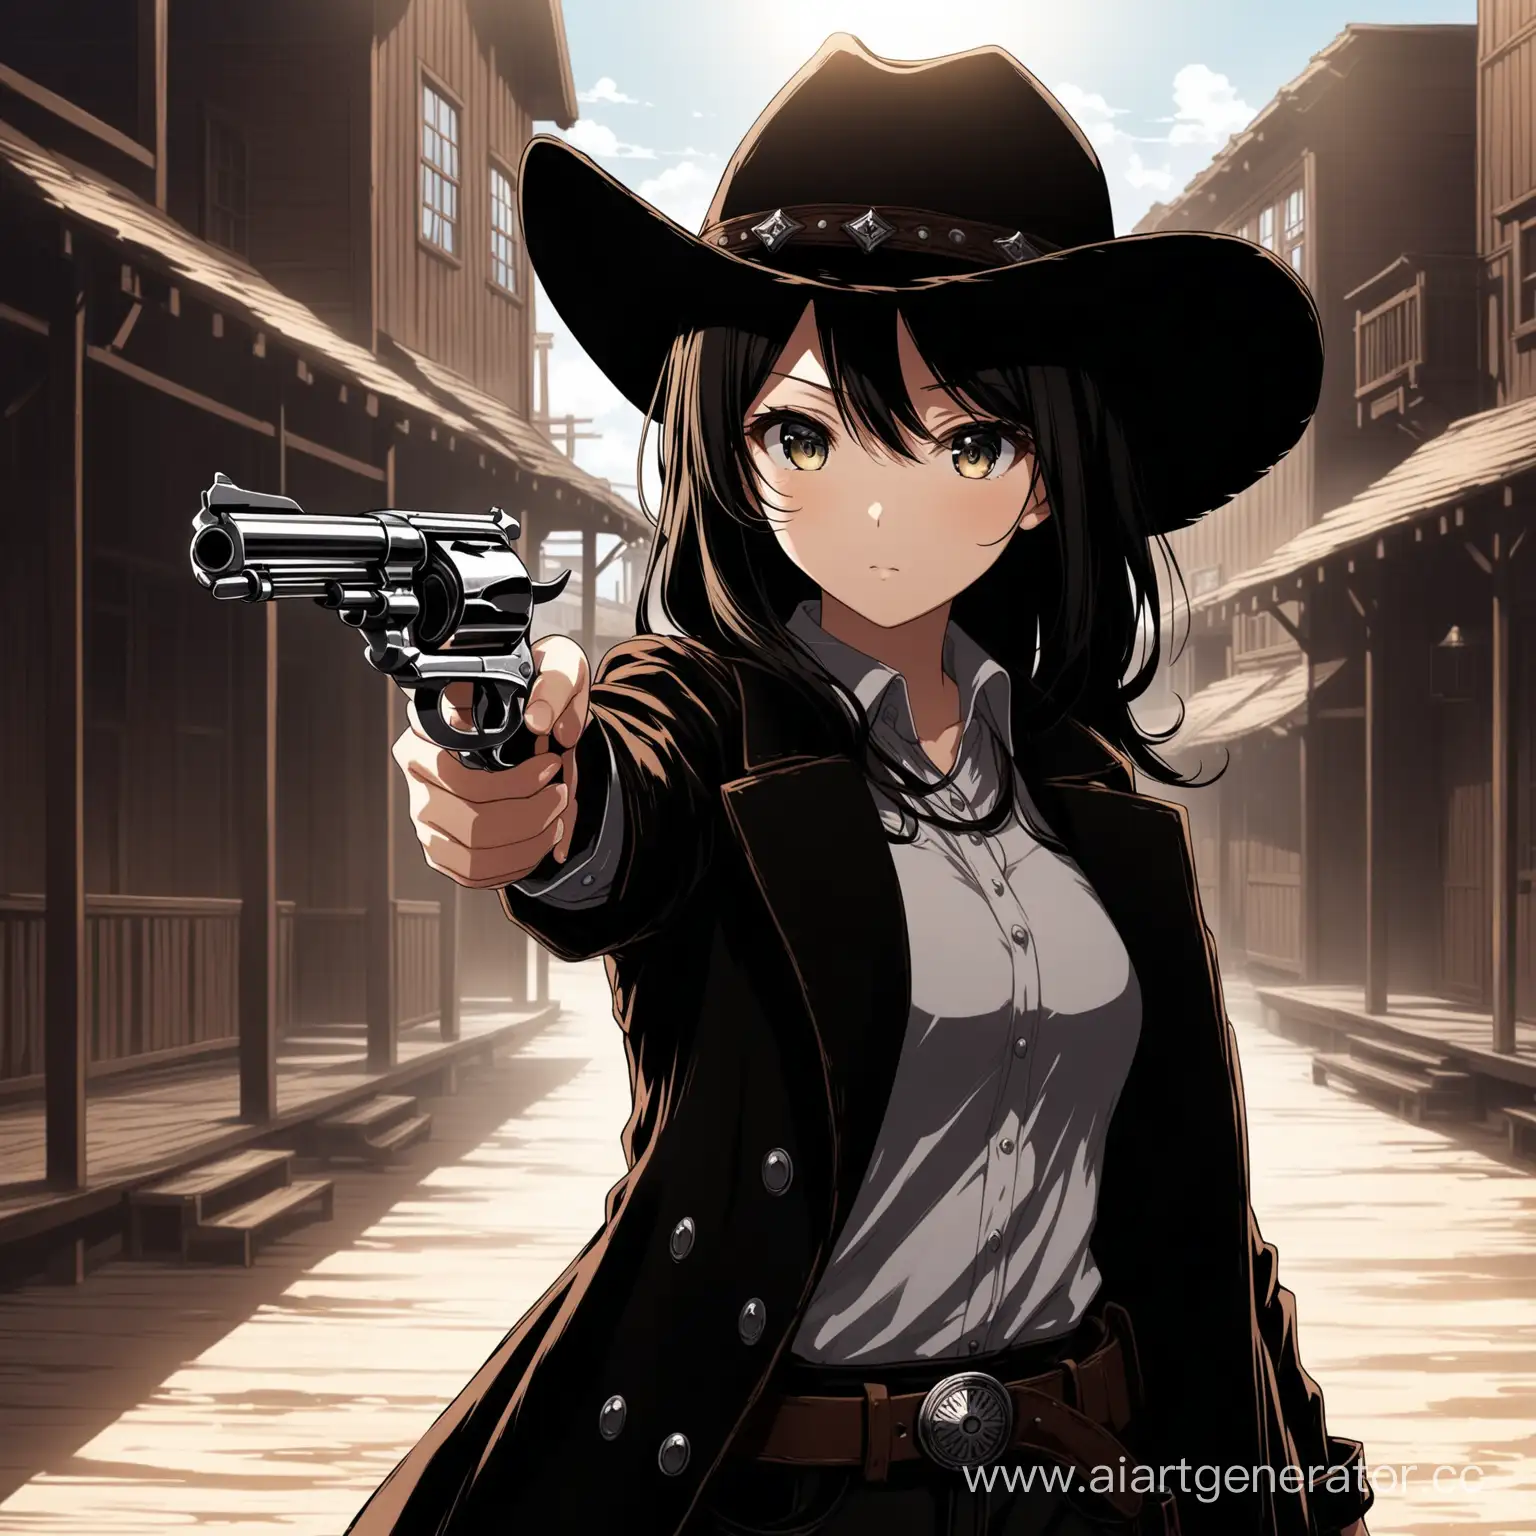 anime girl see in the frame, detail eyes, detail clothes, a cowboy hat and revolver in her hand, a black coat. detail light and shadows, western town location